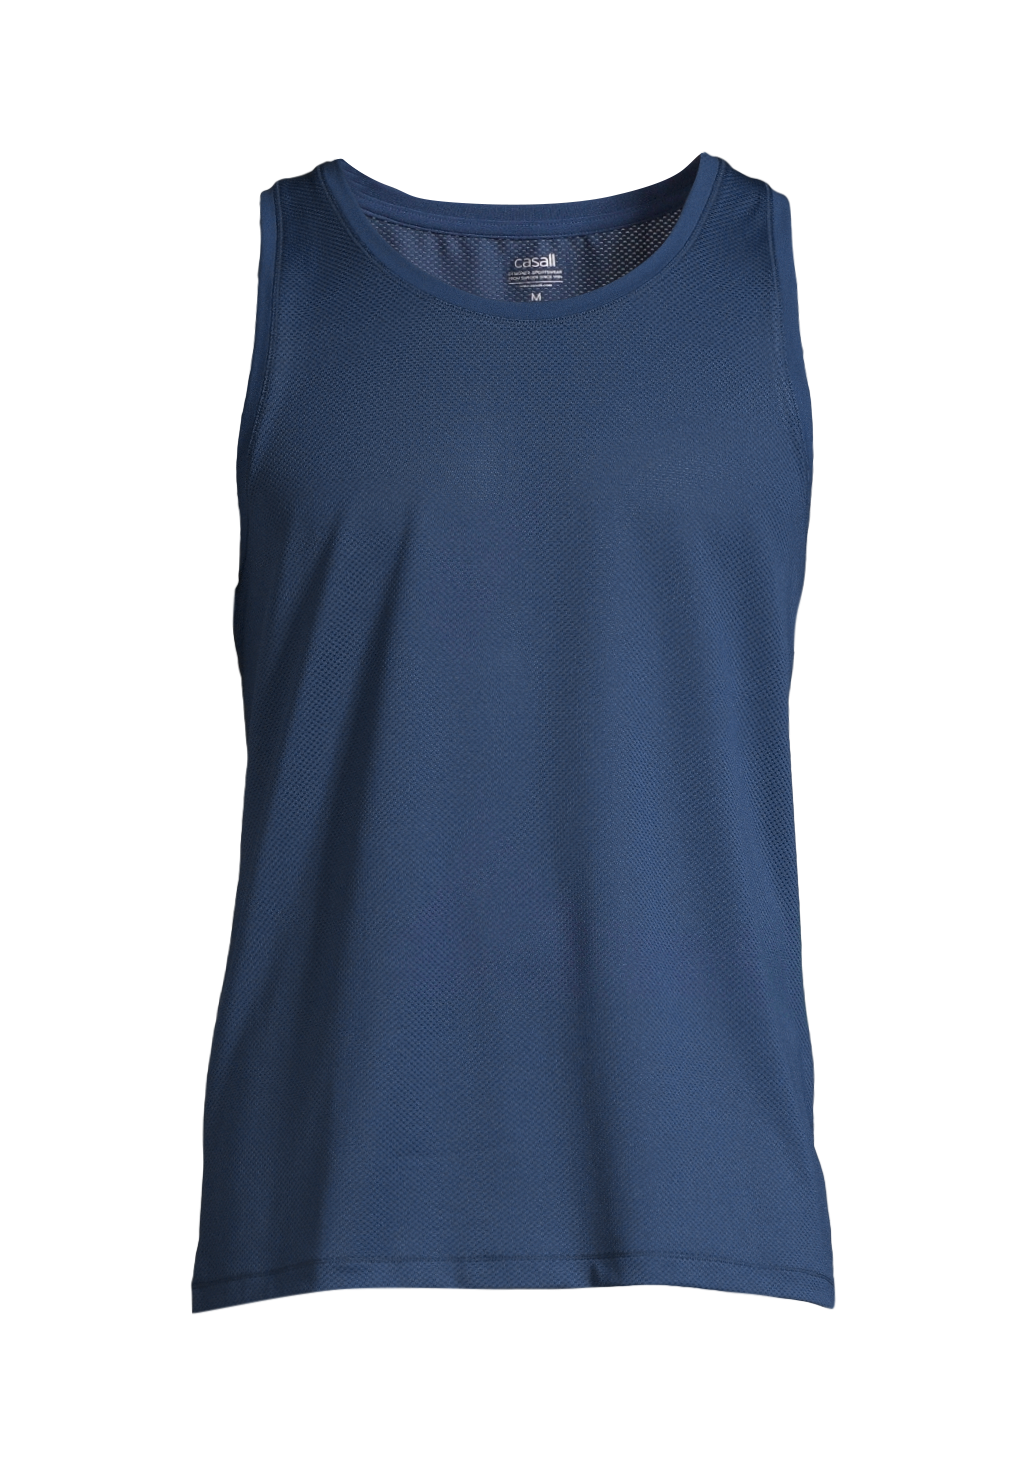 M Structured Tank - Steady Blue